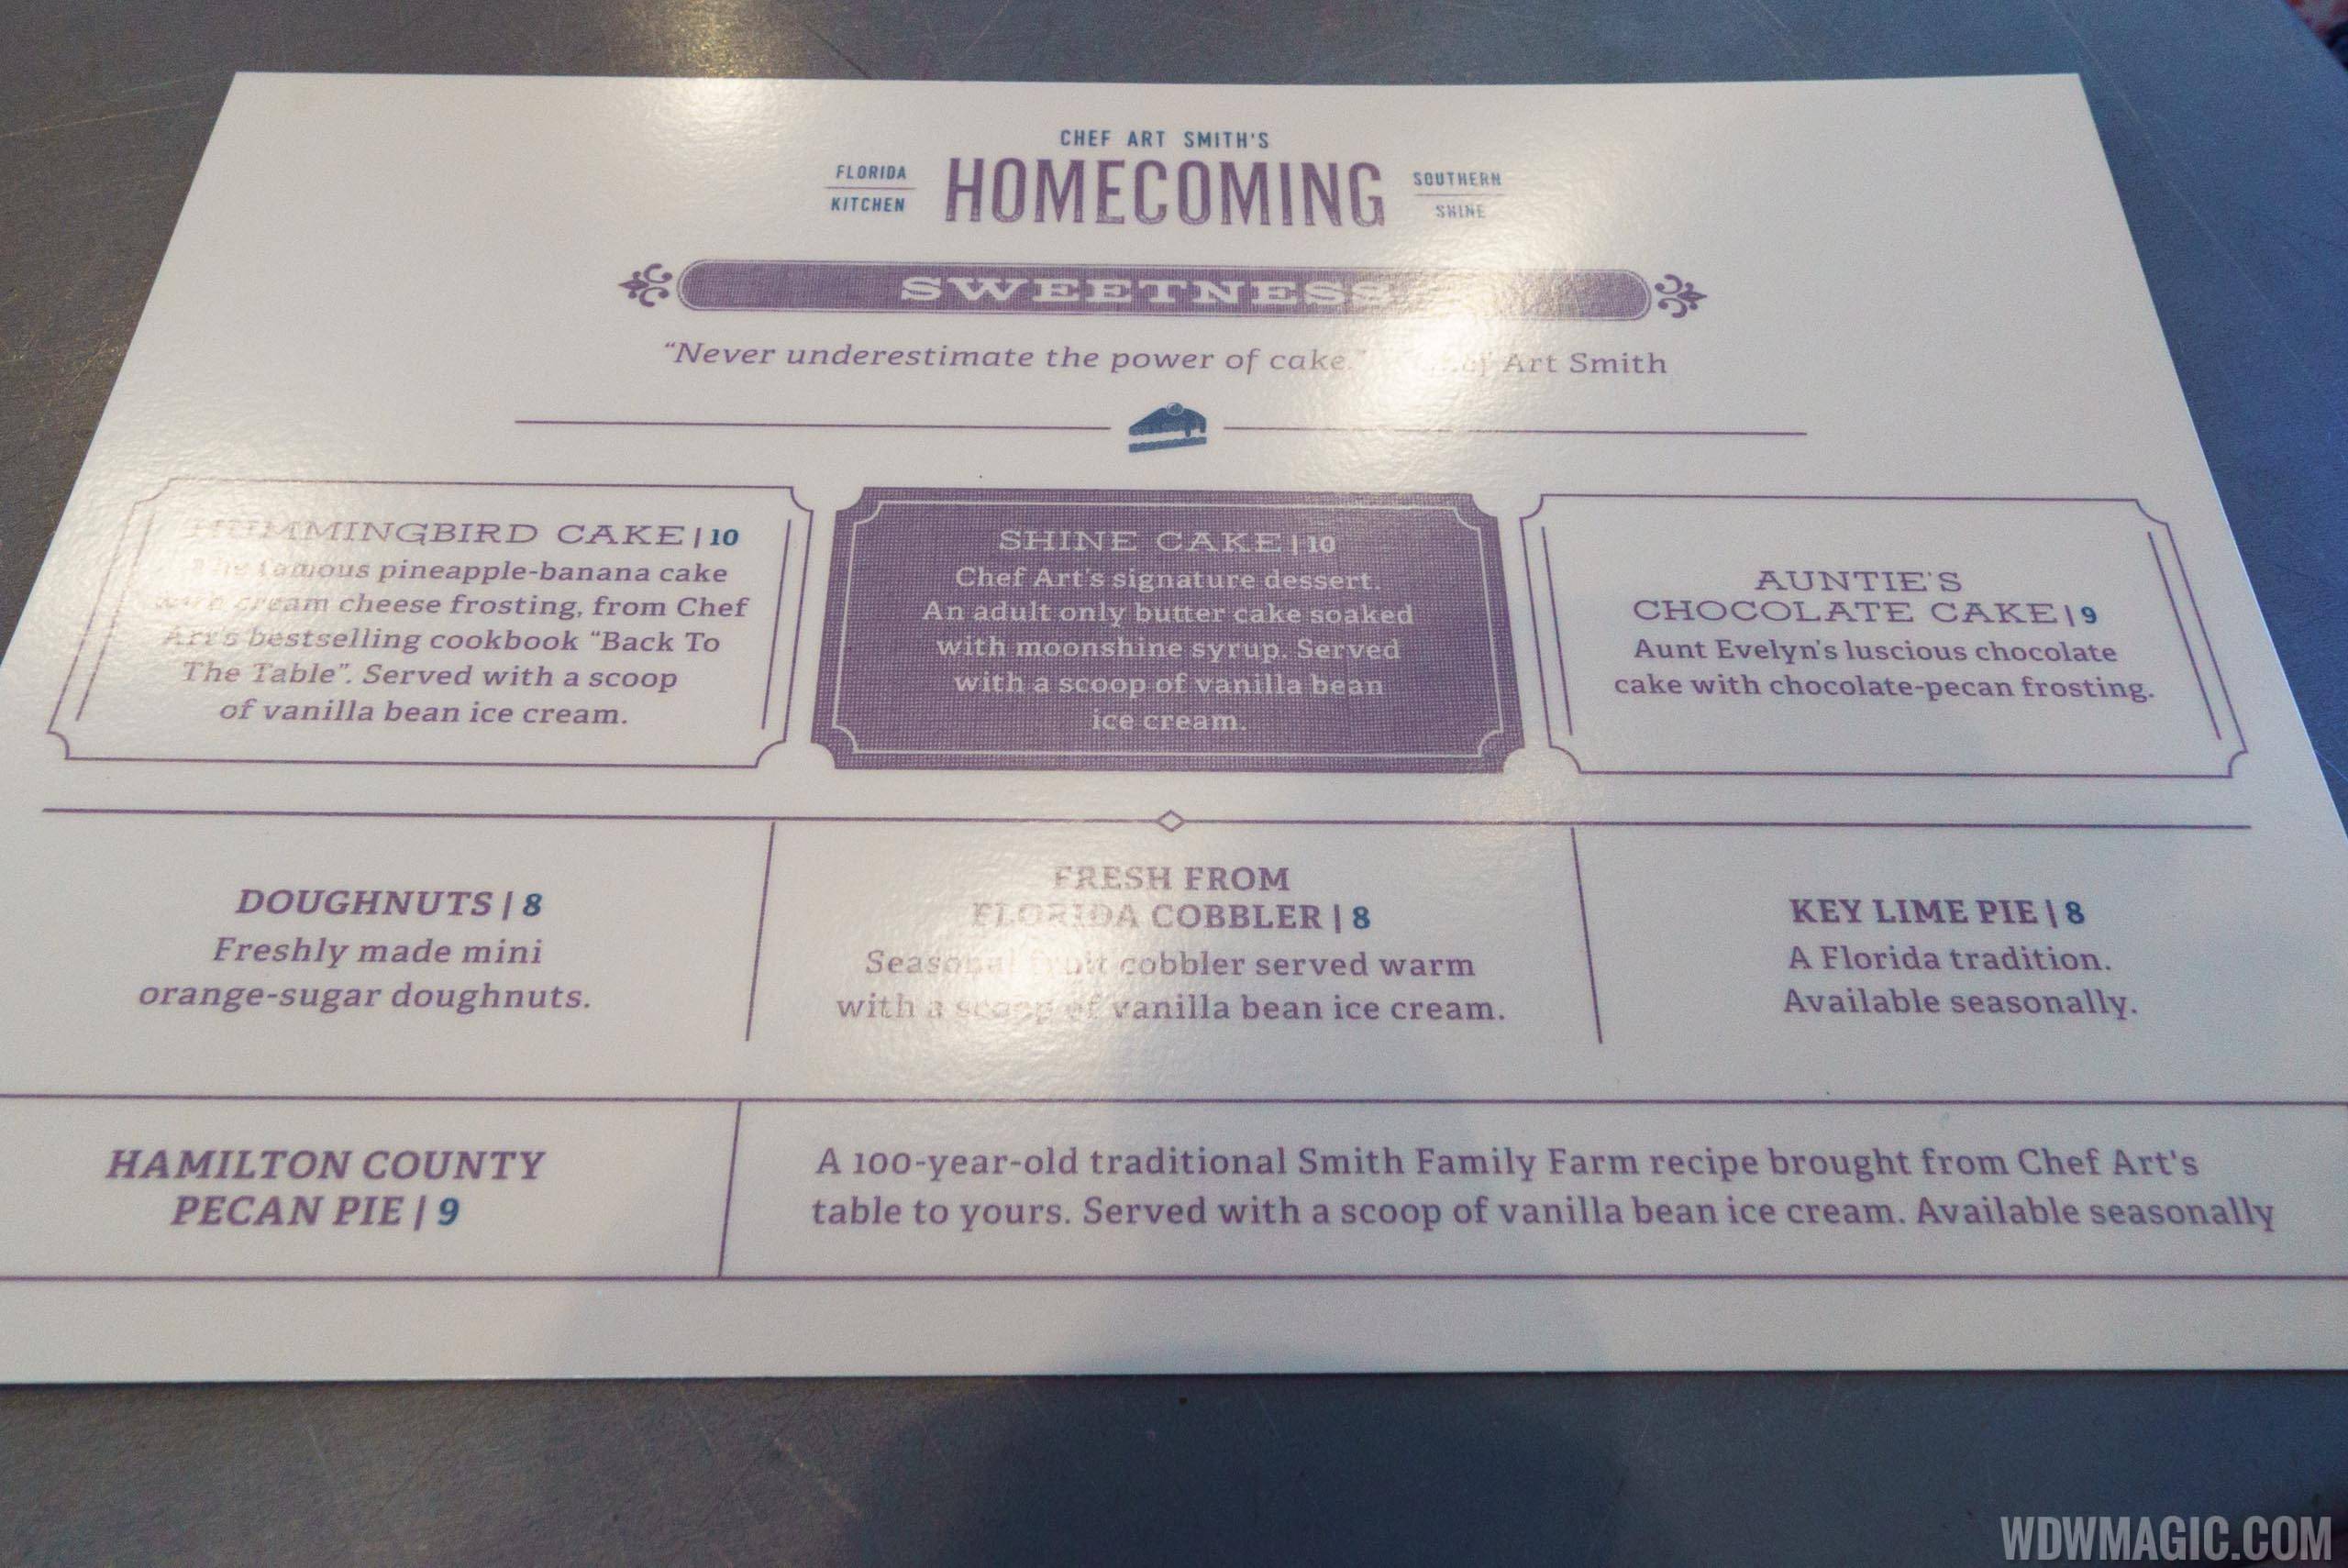 Homecoming - Florida Kitchen overview